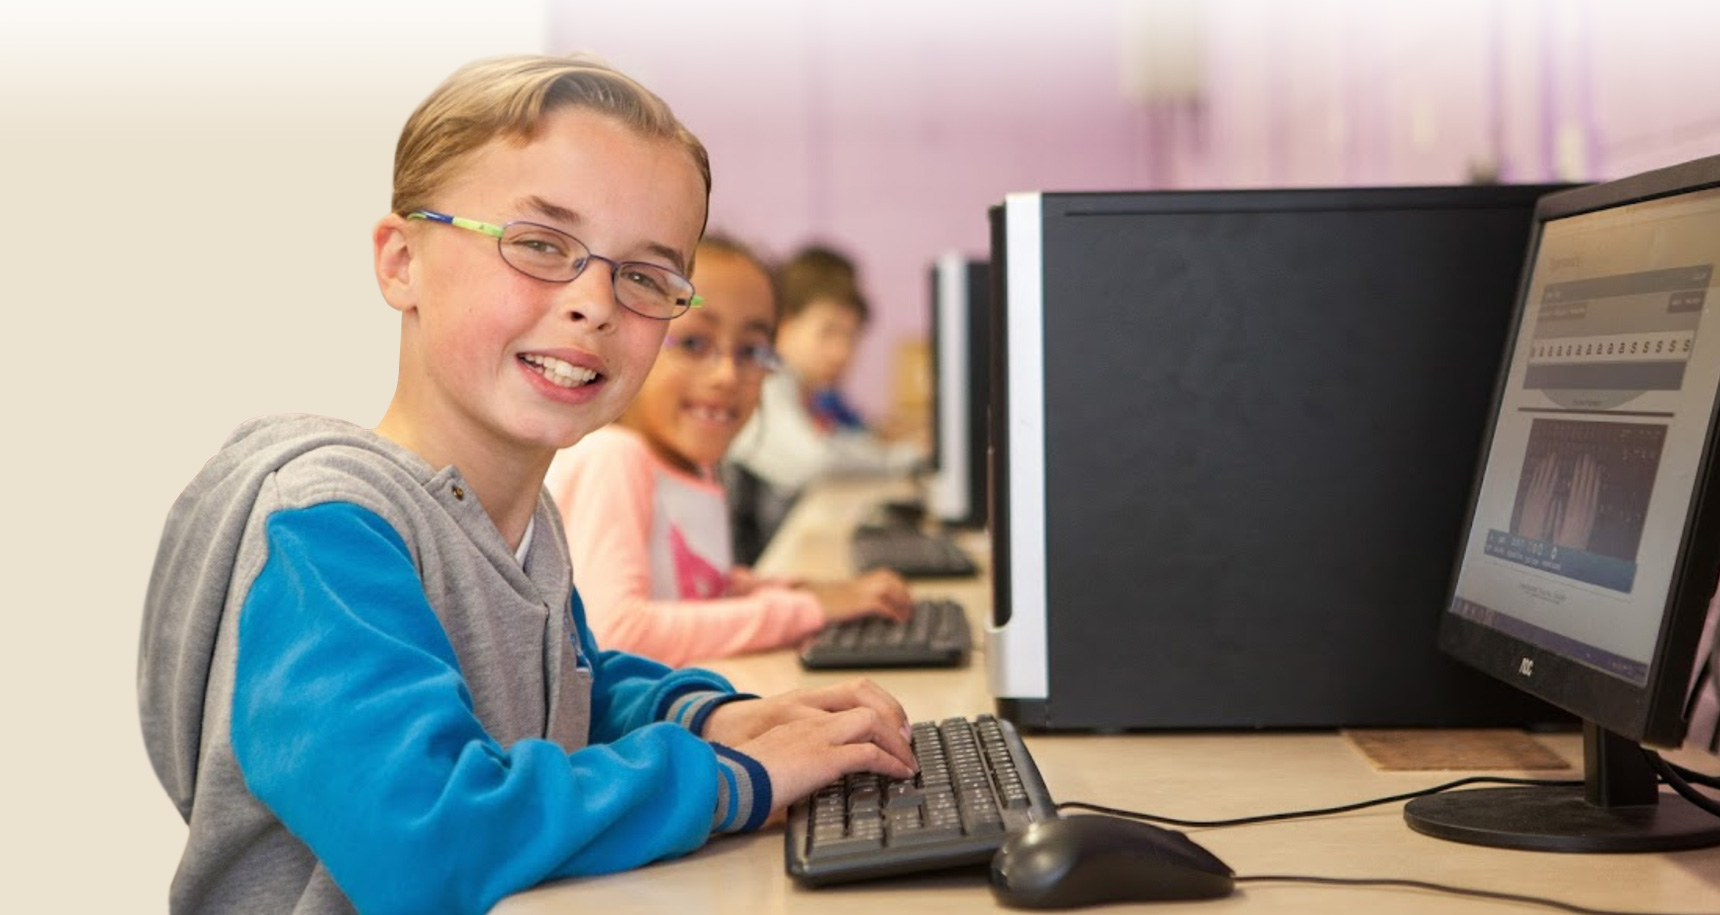 What essential computer skills should your child learn to stay ahead of the curve?